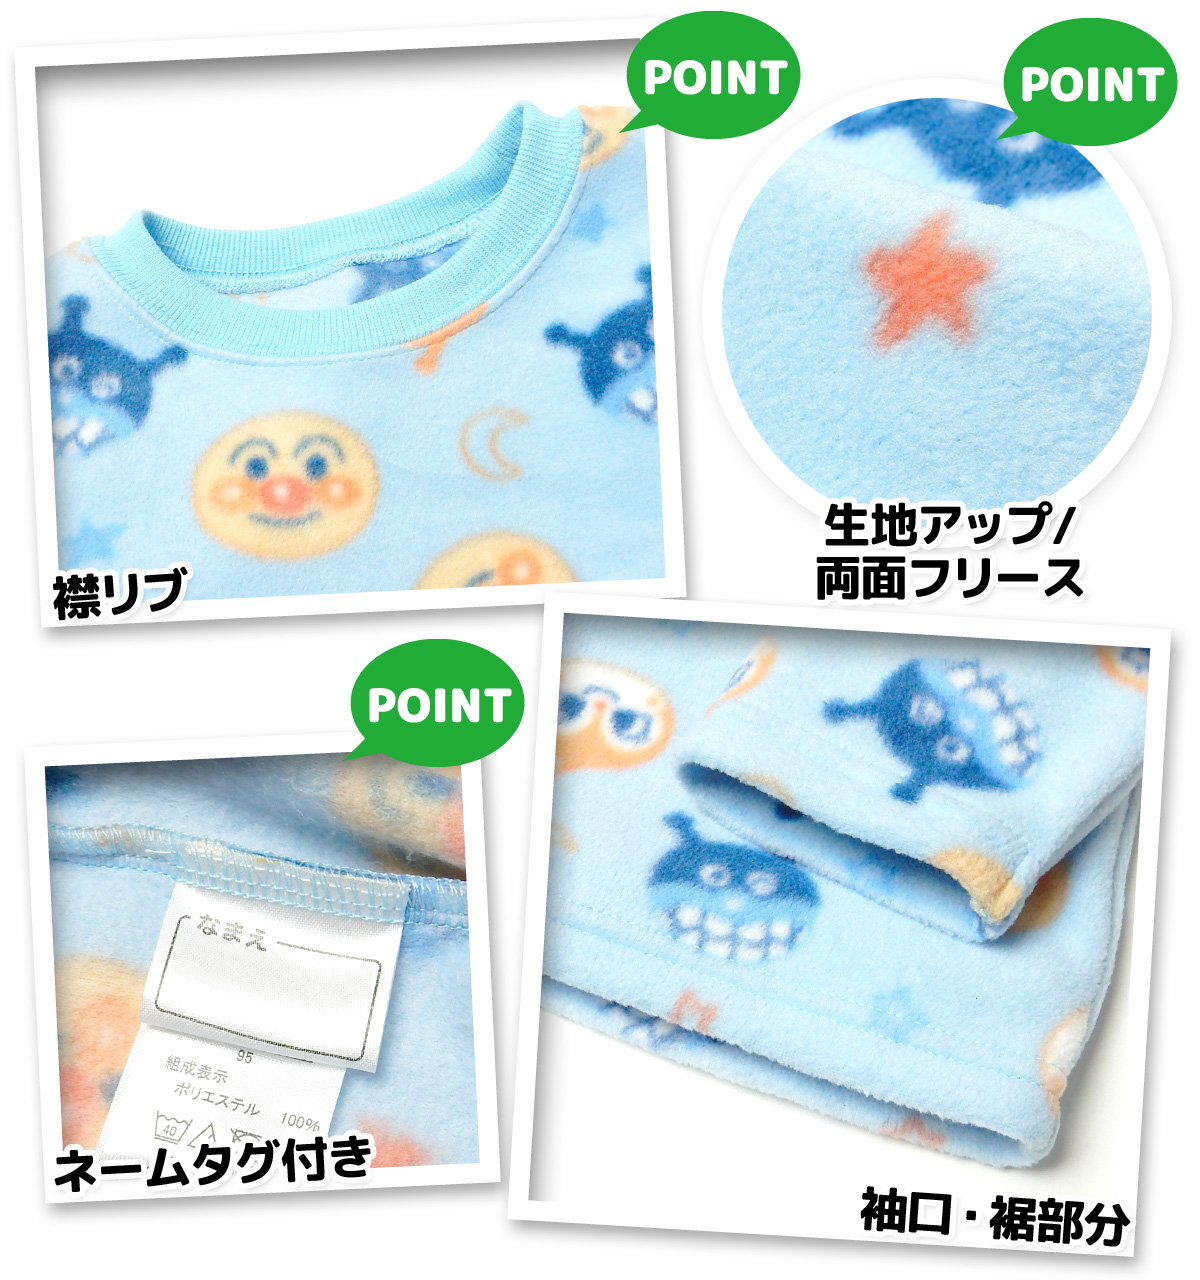  free shipping man . baby fleece long sleeve pyjamas Anpanman warm material top and bottom collection rear inset baby clothes man iw-0720c-bl mail service correspondence 